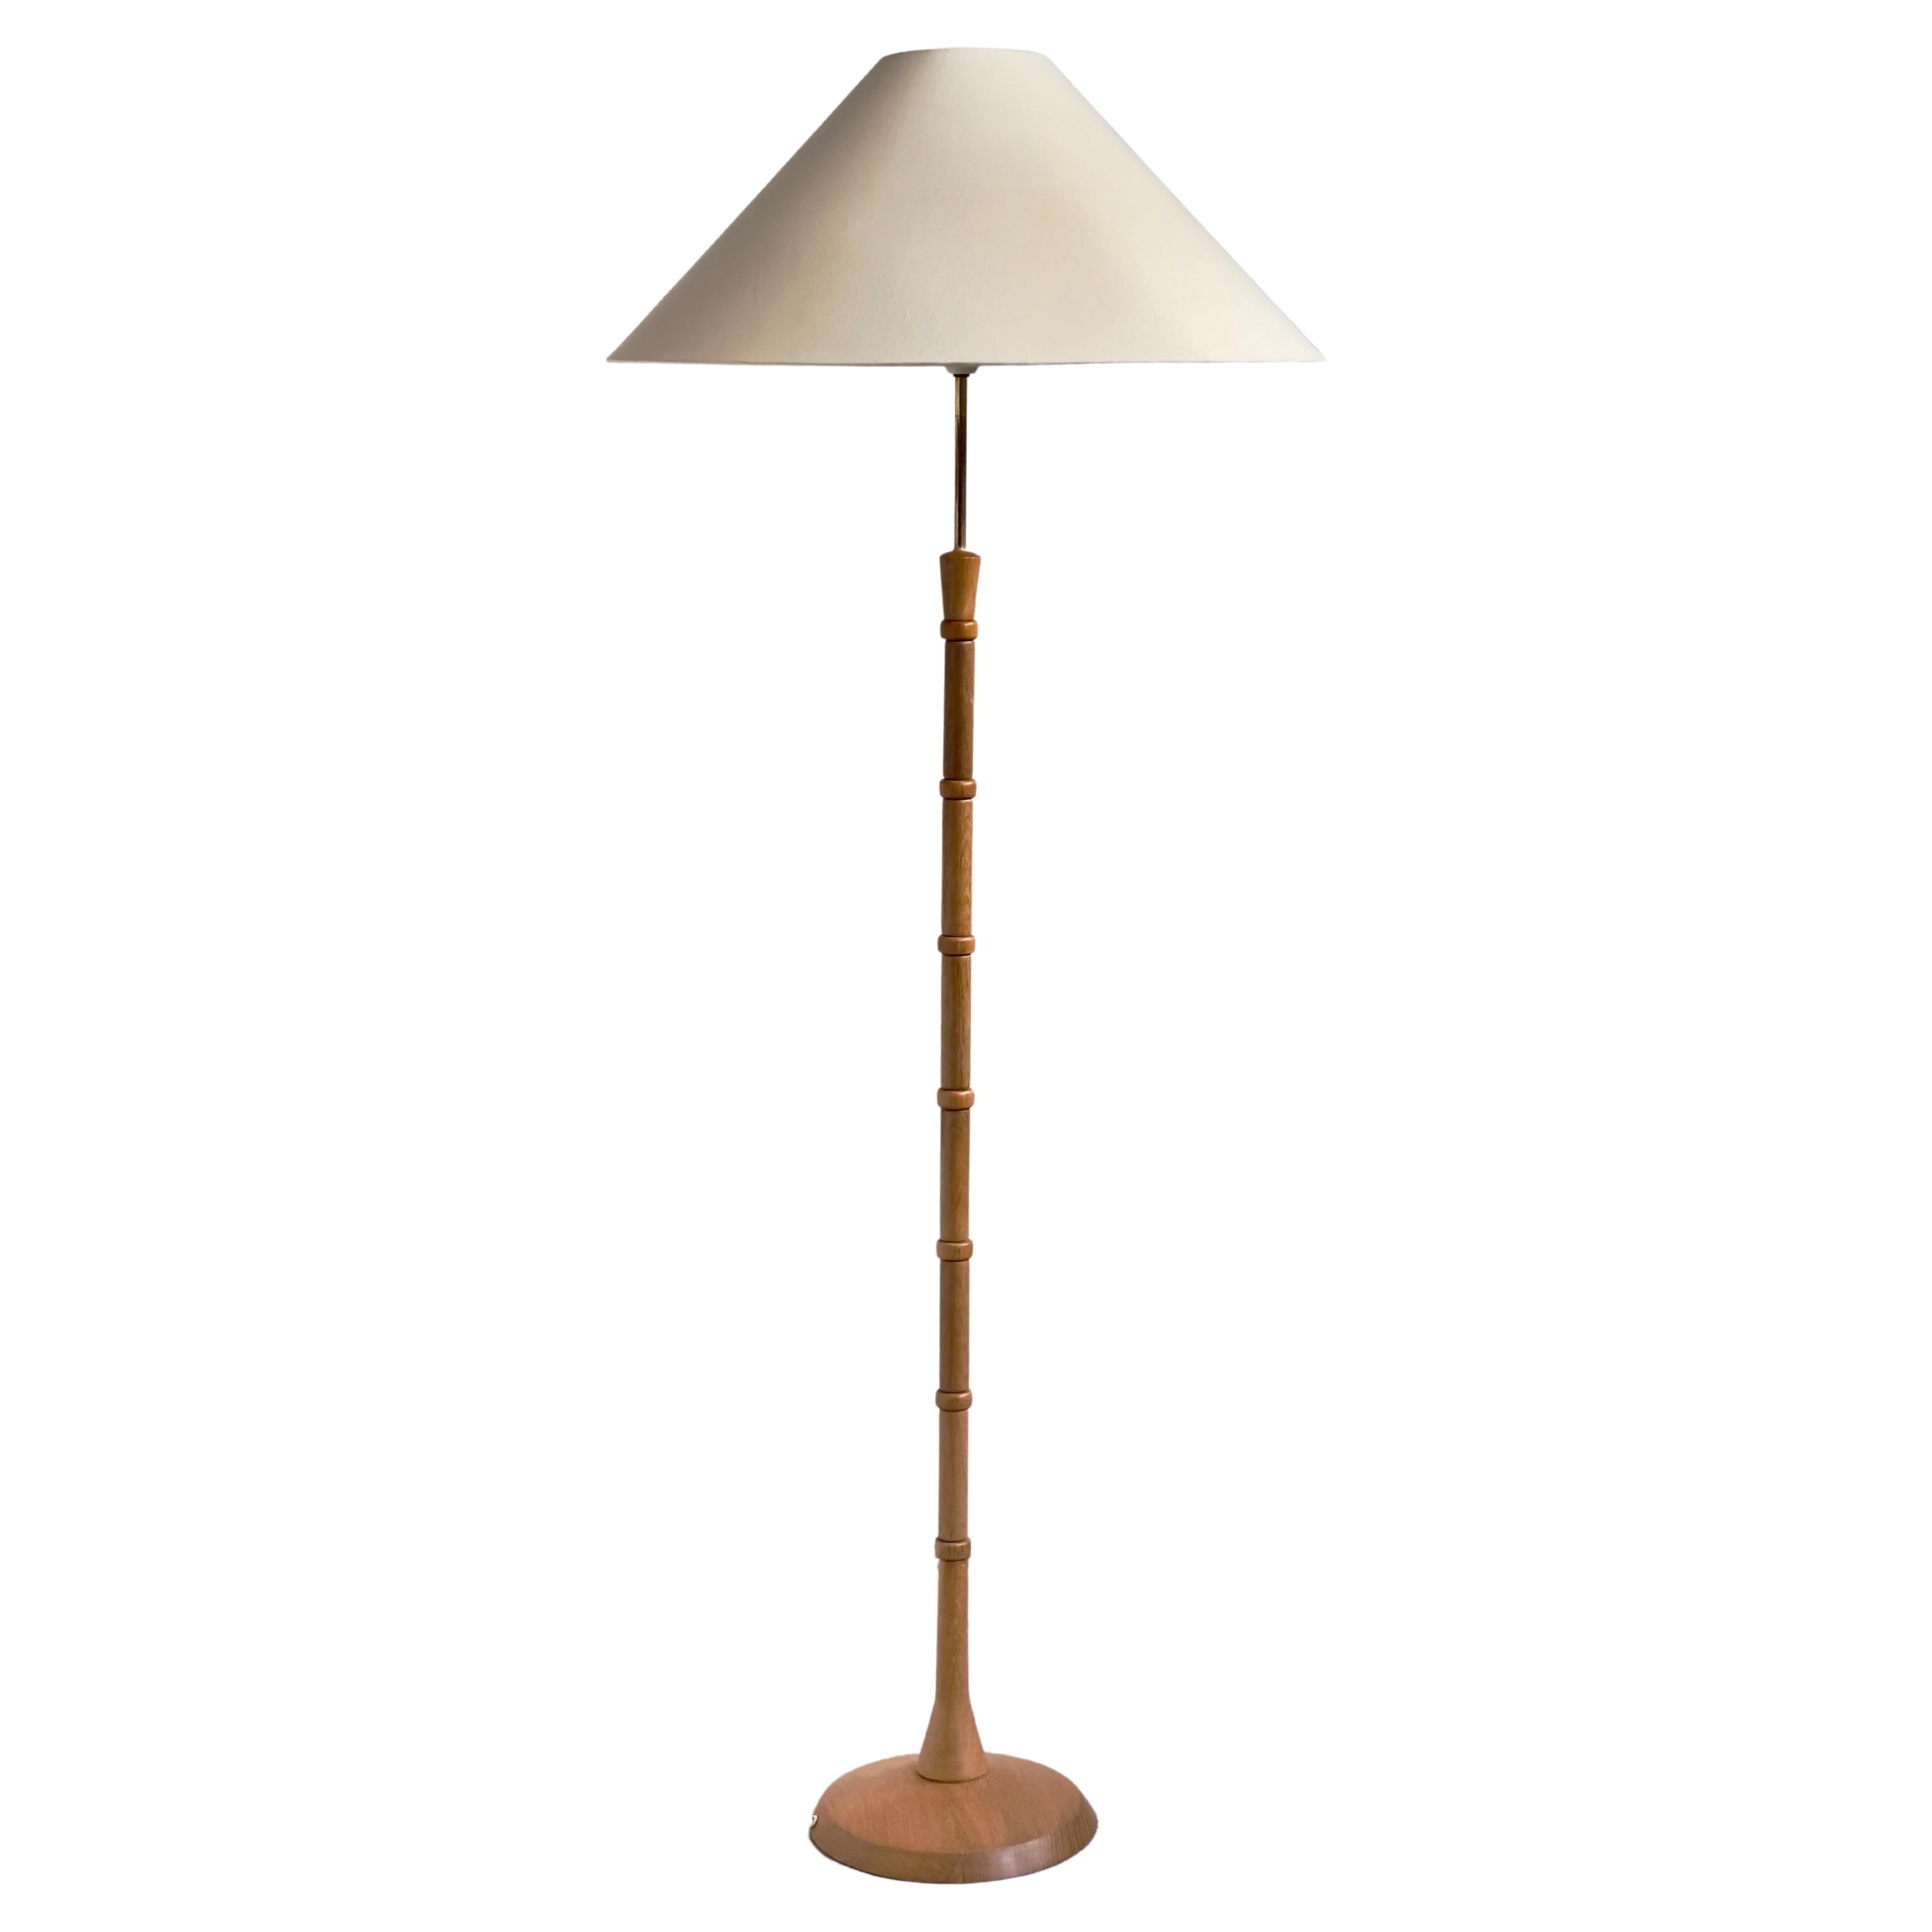 Rare 1960s Danish Modern Floor Lamp in Solid Oak and Brass with New Linen Shade For Sale